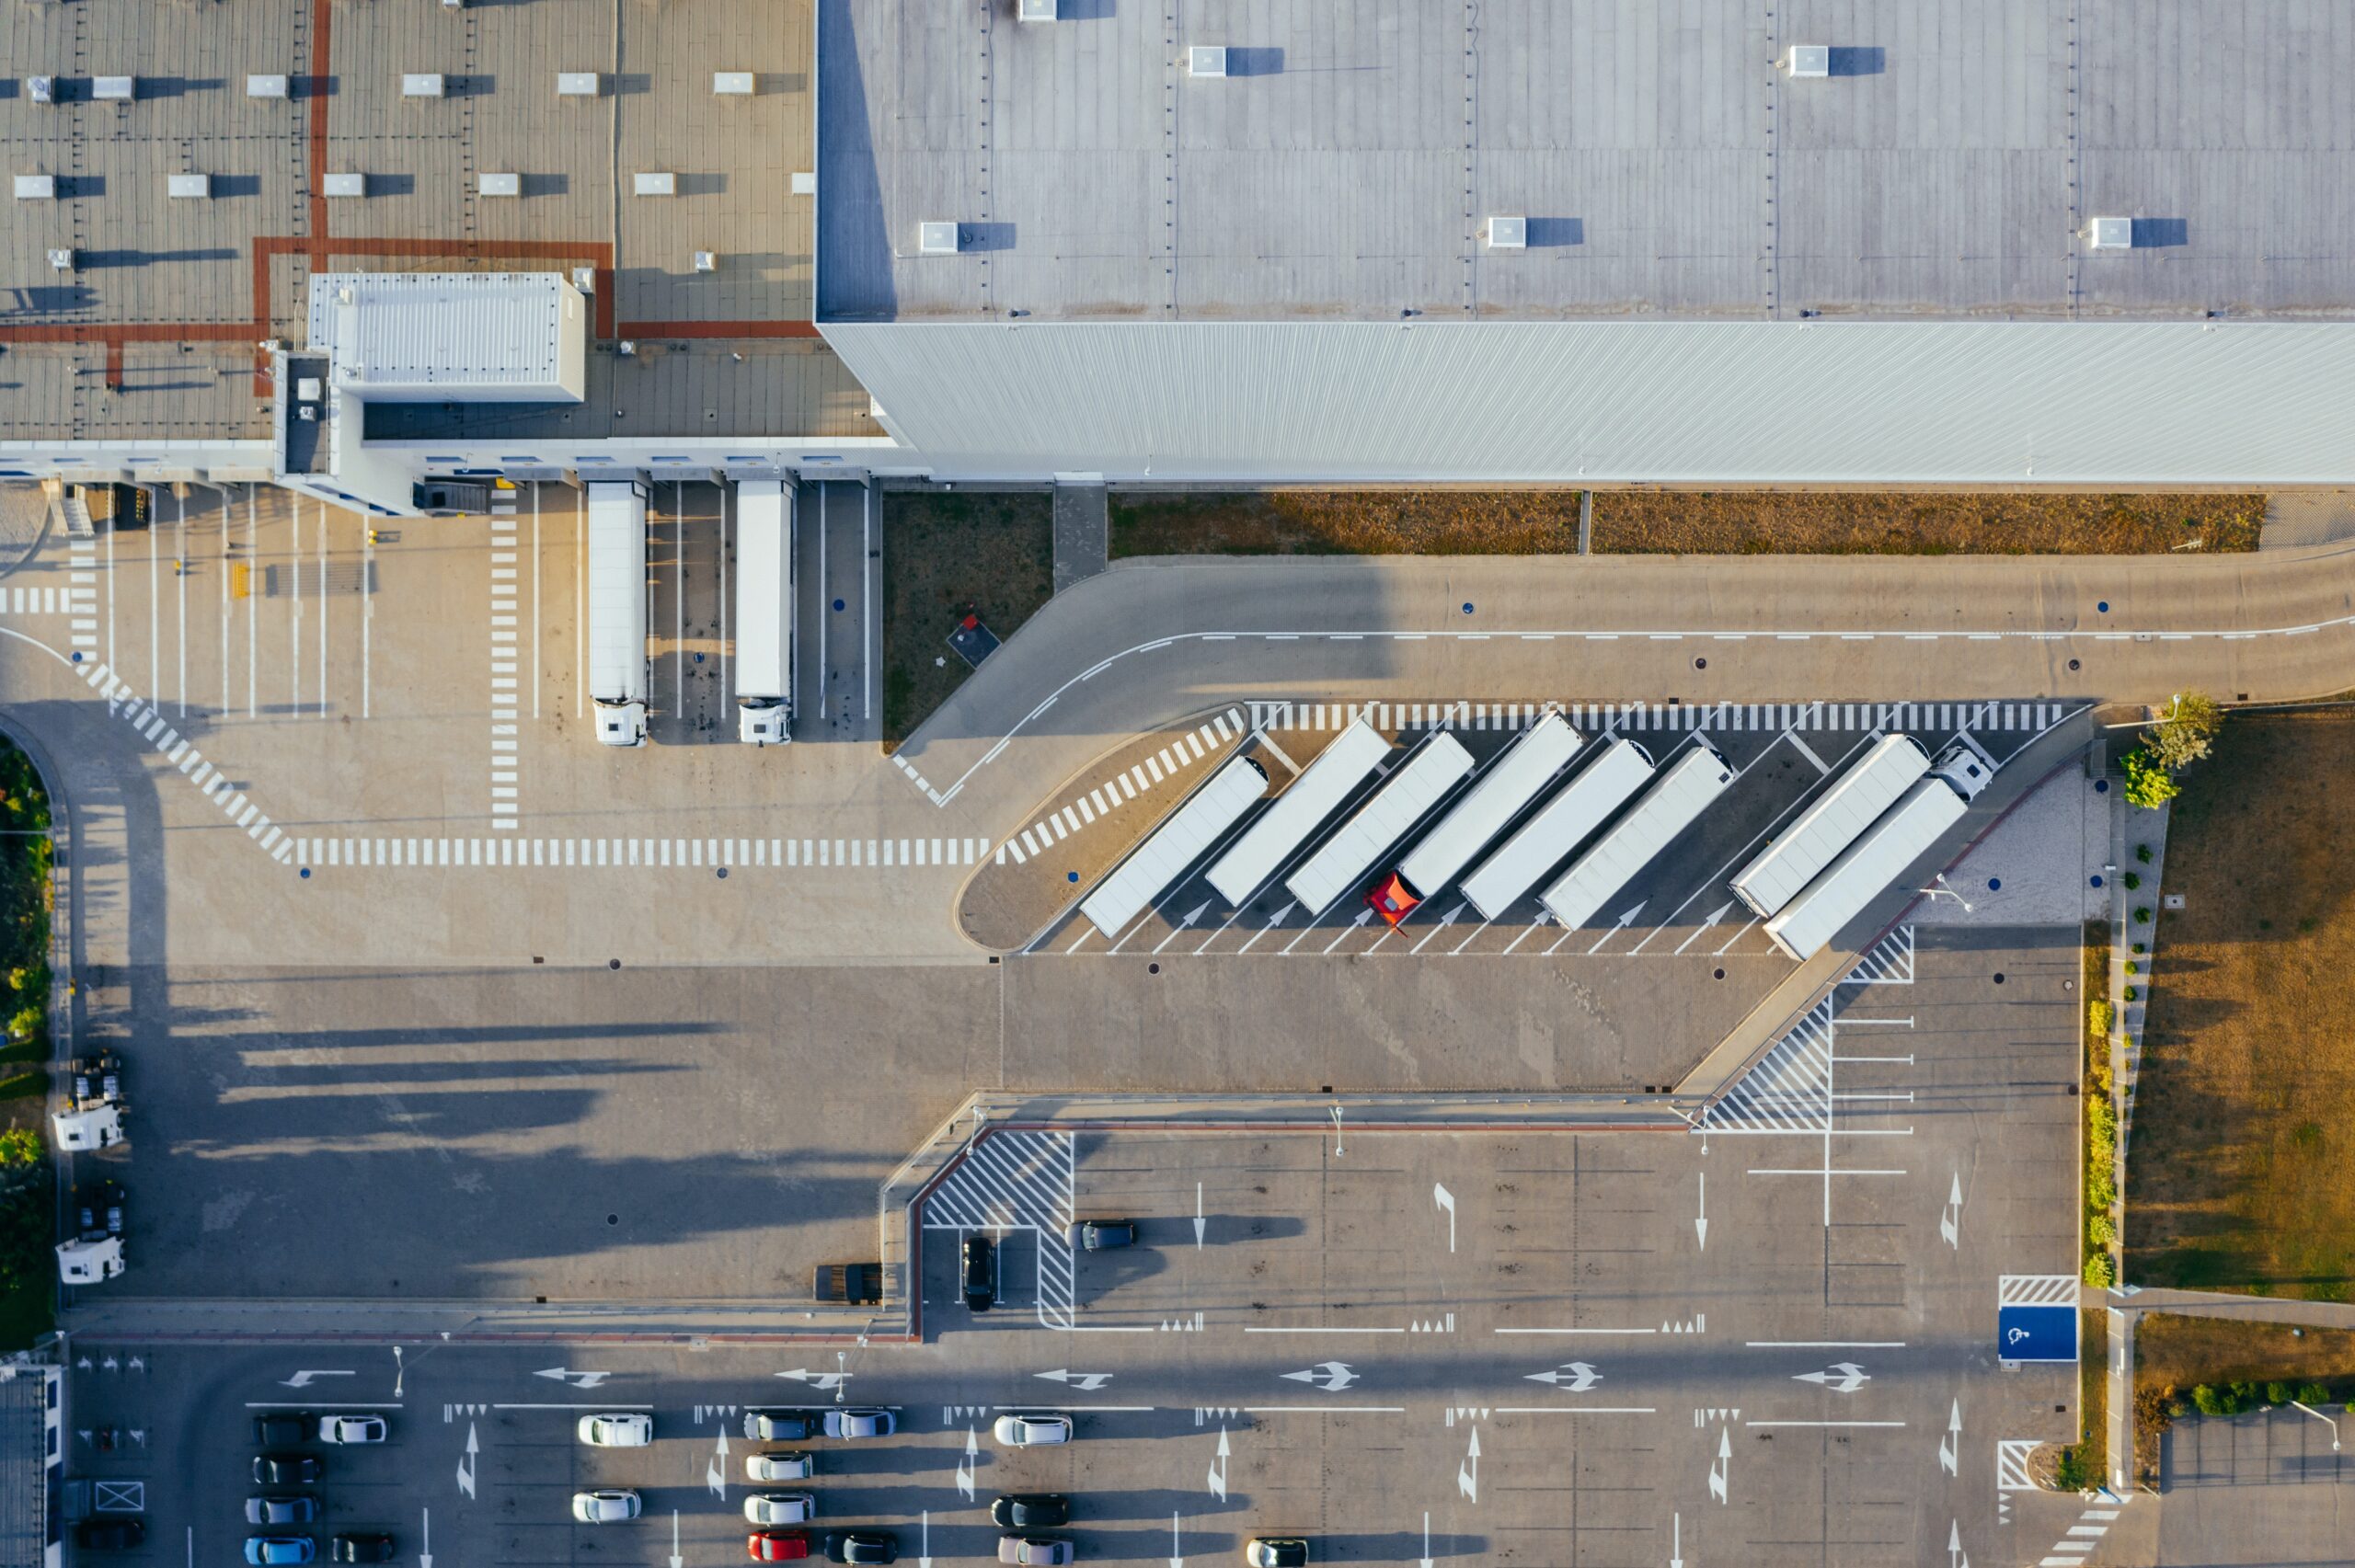 agile supply chain aerial view of a distribution center with trailers and cars parked 